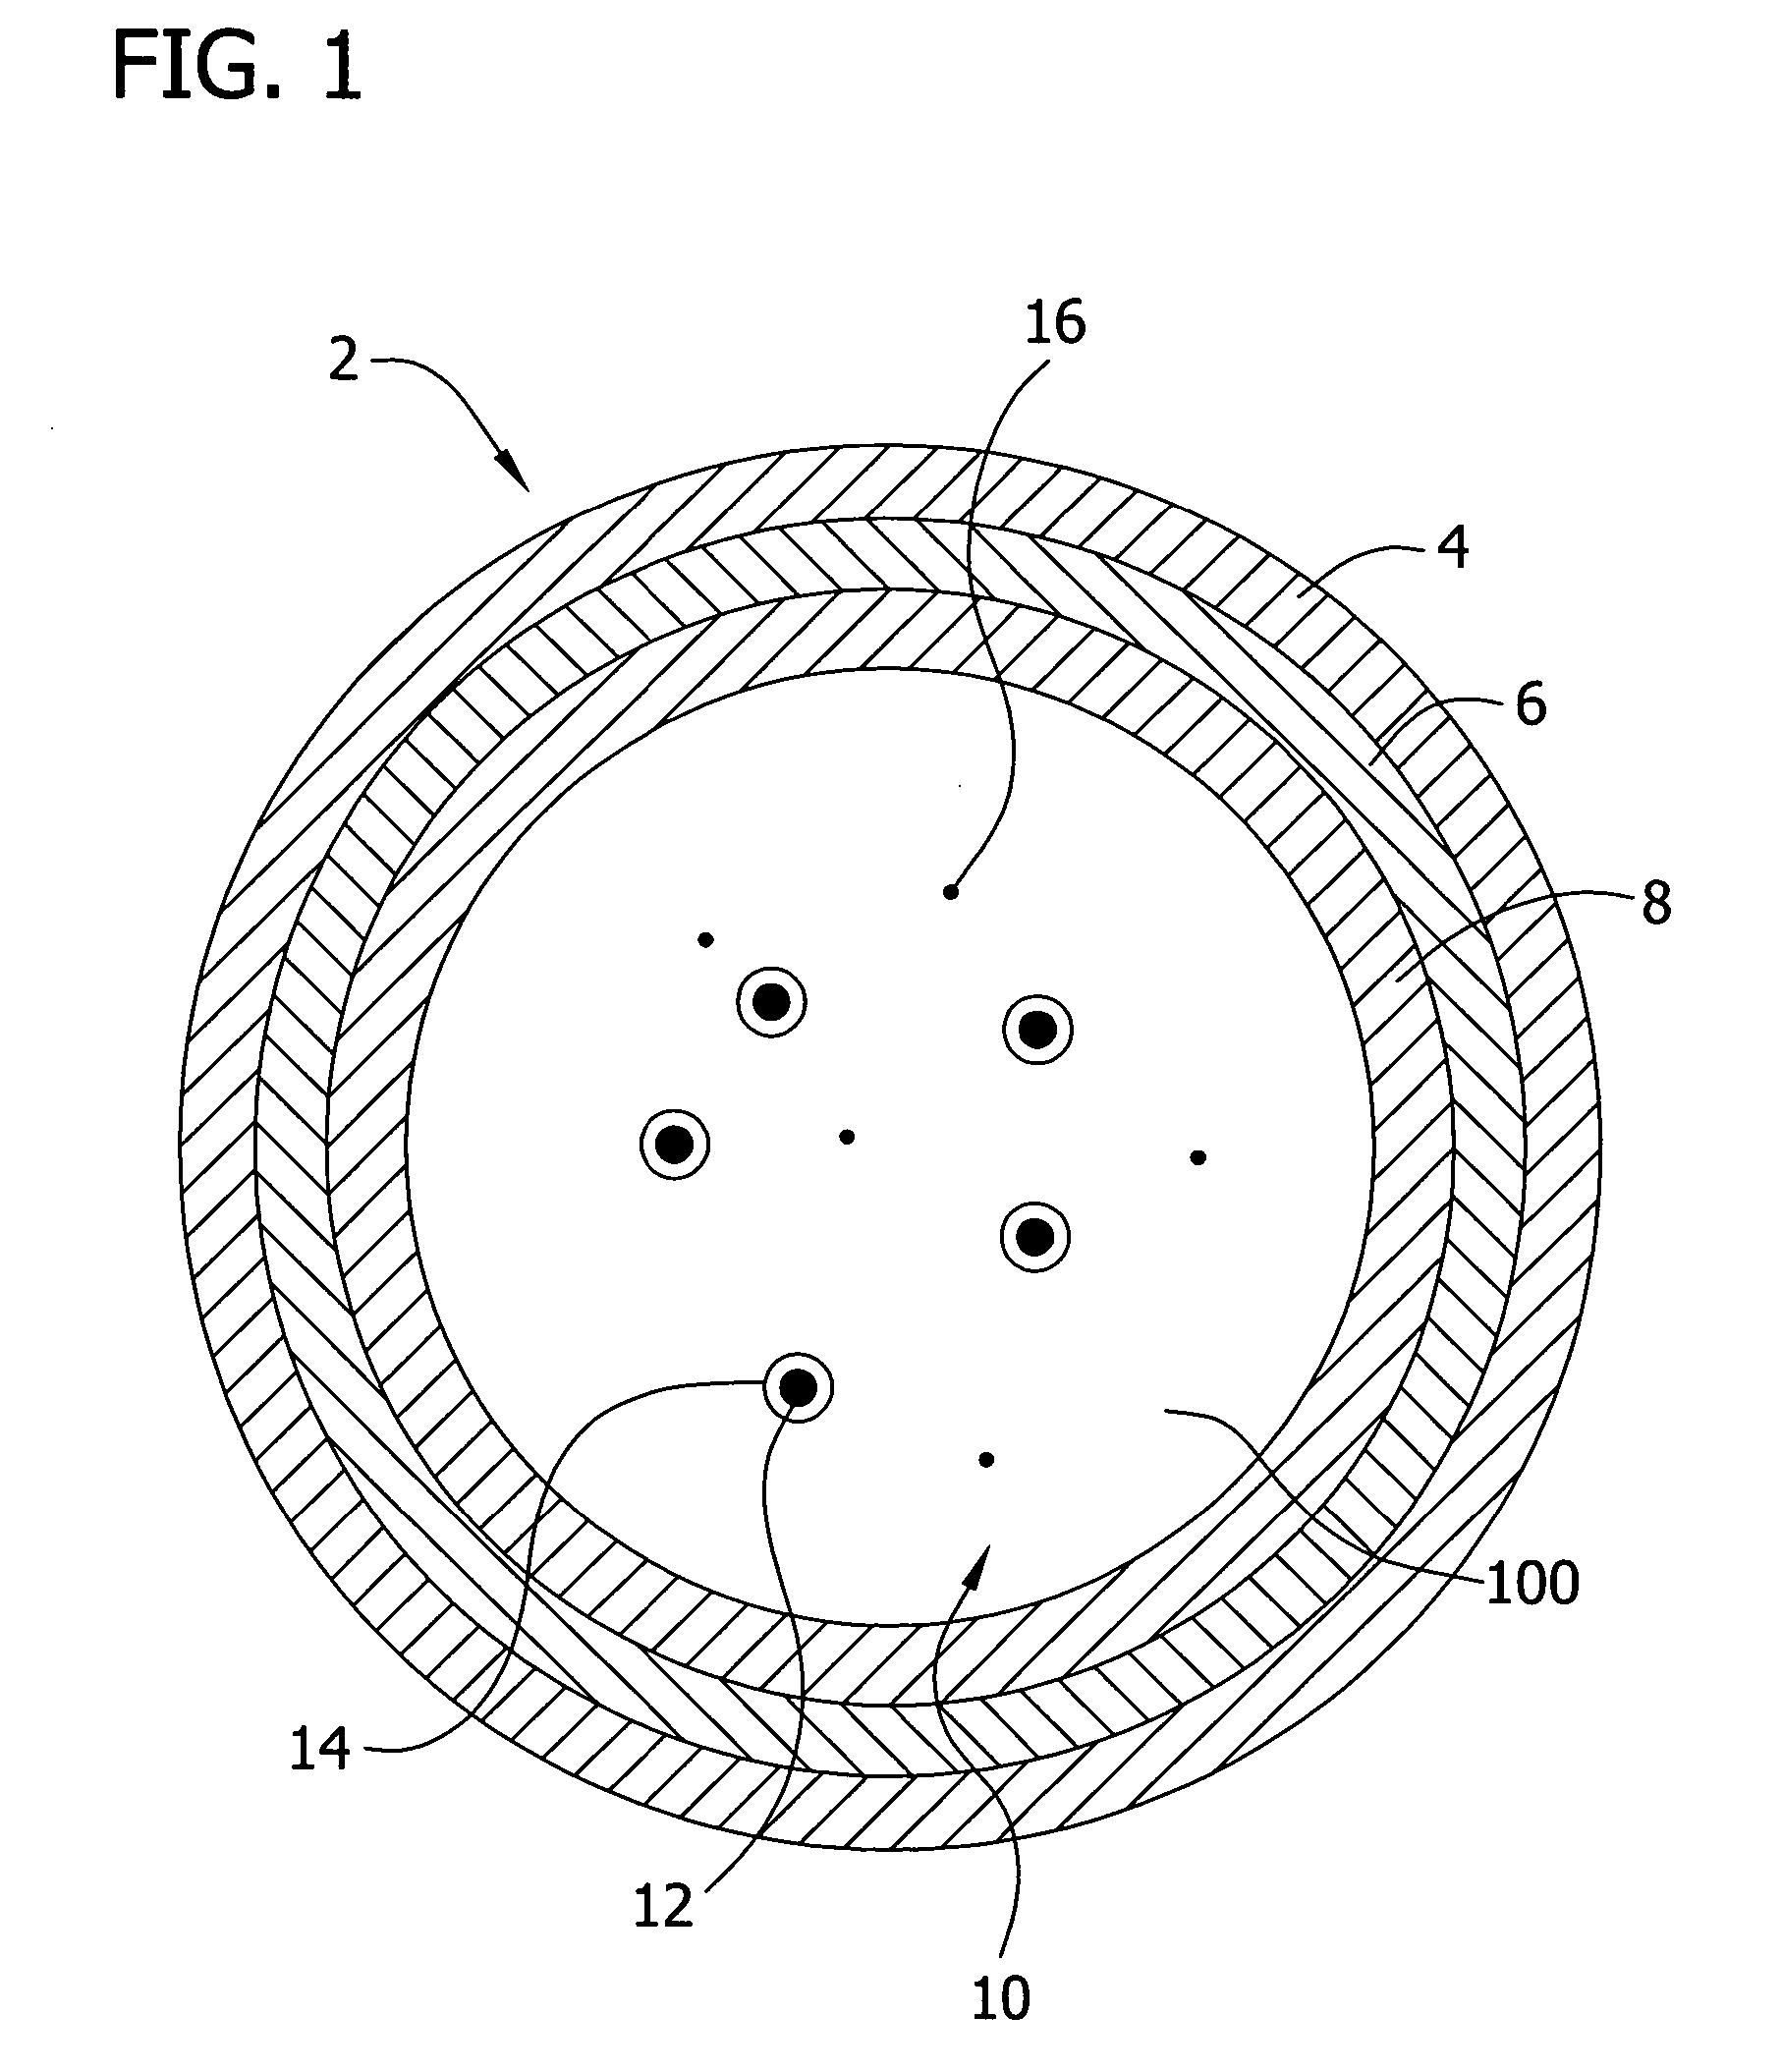 Processes for producing microencapsulated delivery vehicles